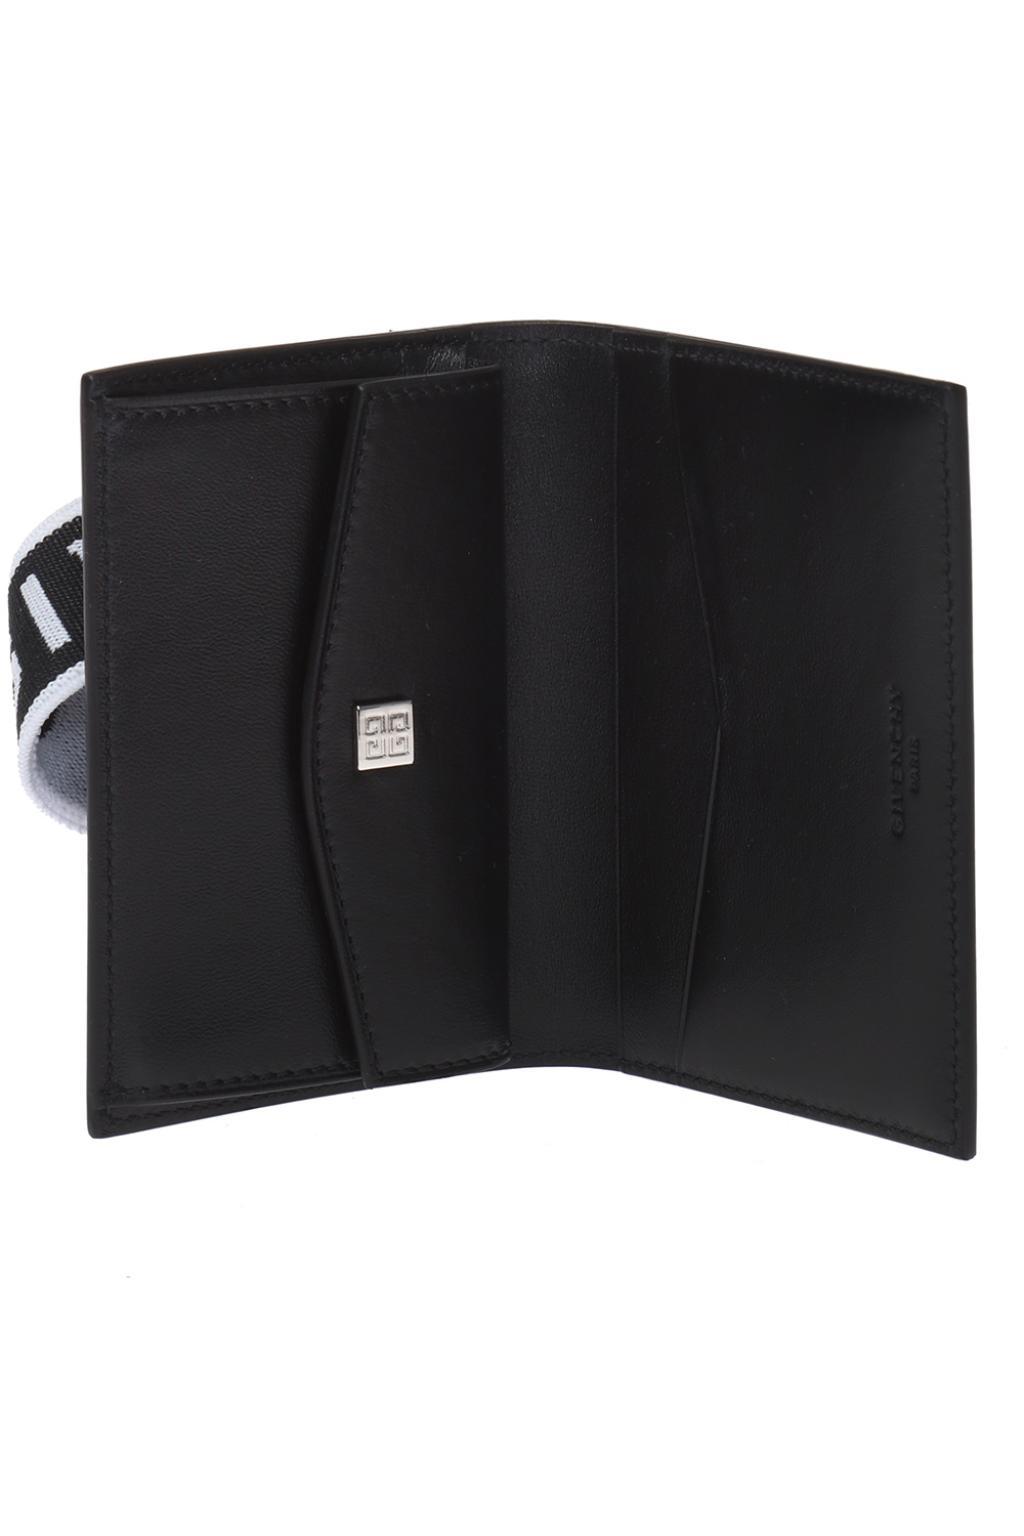 Givenchy Leather Elastic Panel Card Case in Black | Lyst